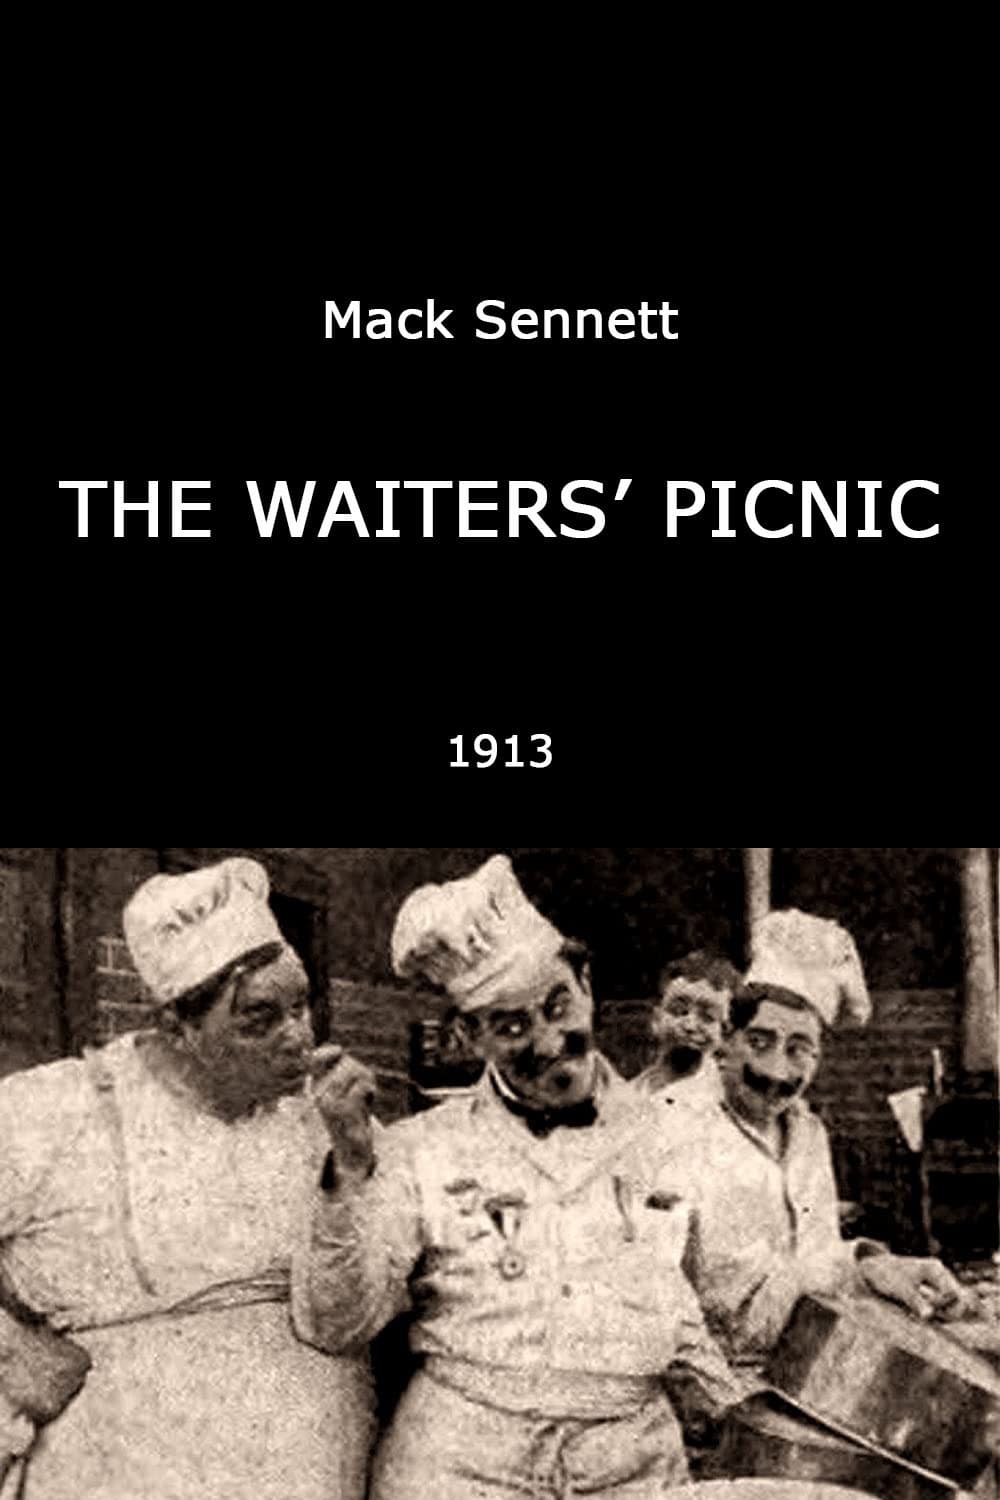 The Waiters' Picnic (1913)